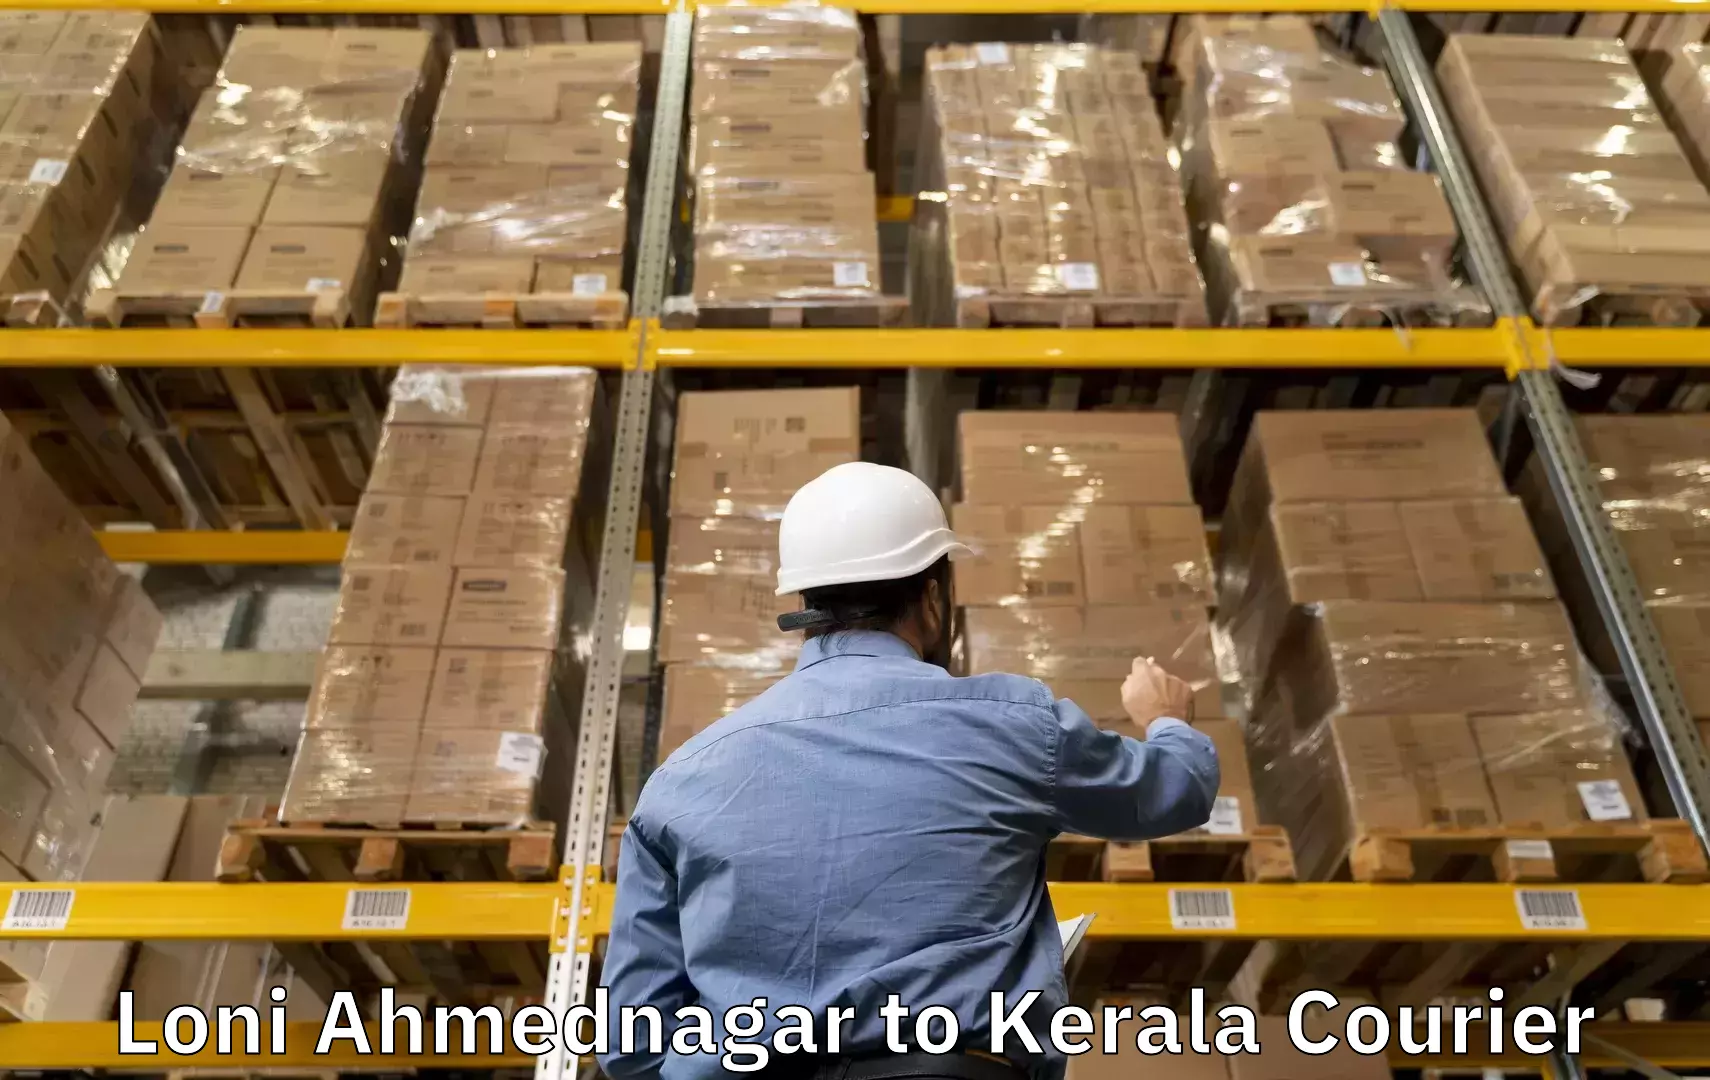 Luggage delivery system Loni Ahmednagar to Kozhikode